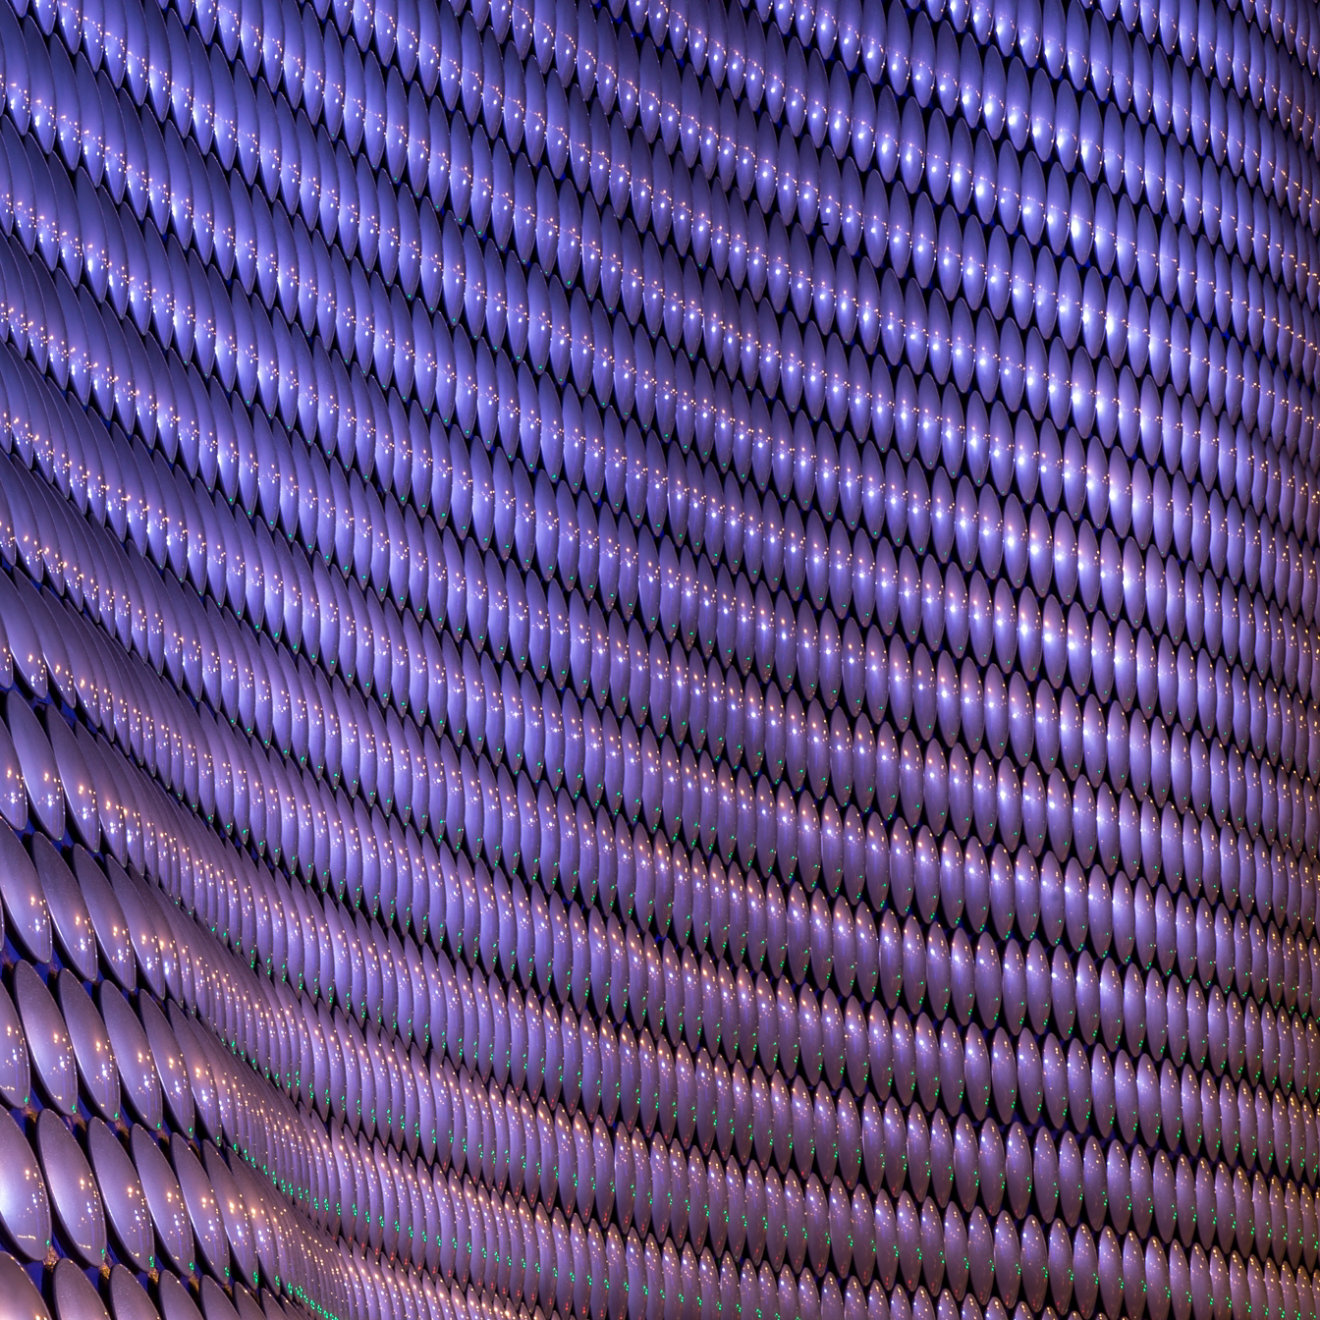 A close up of circular purple cladding on a large curved building